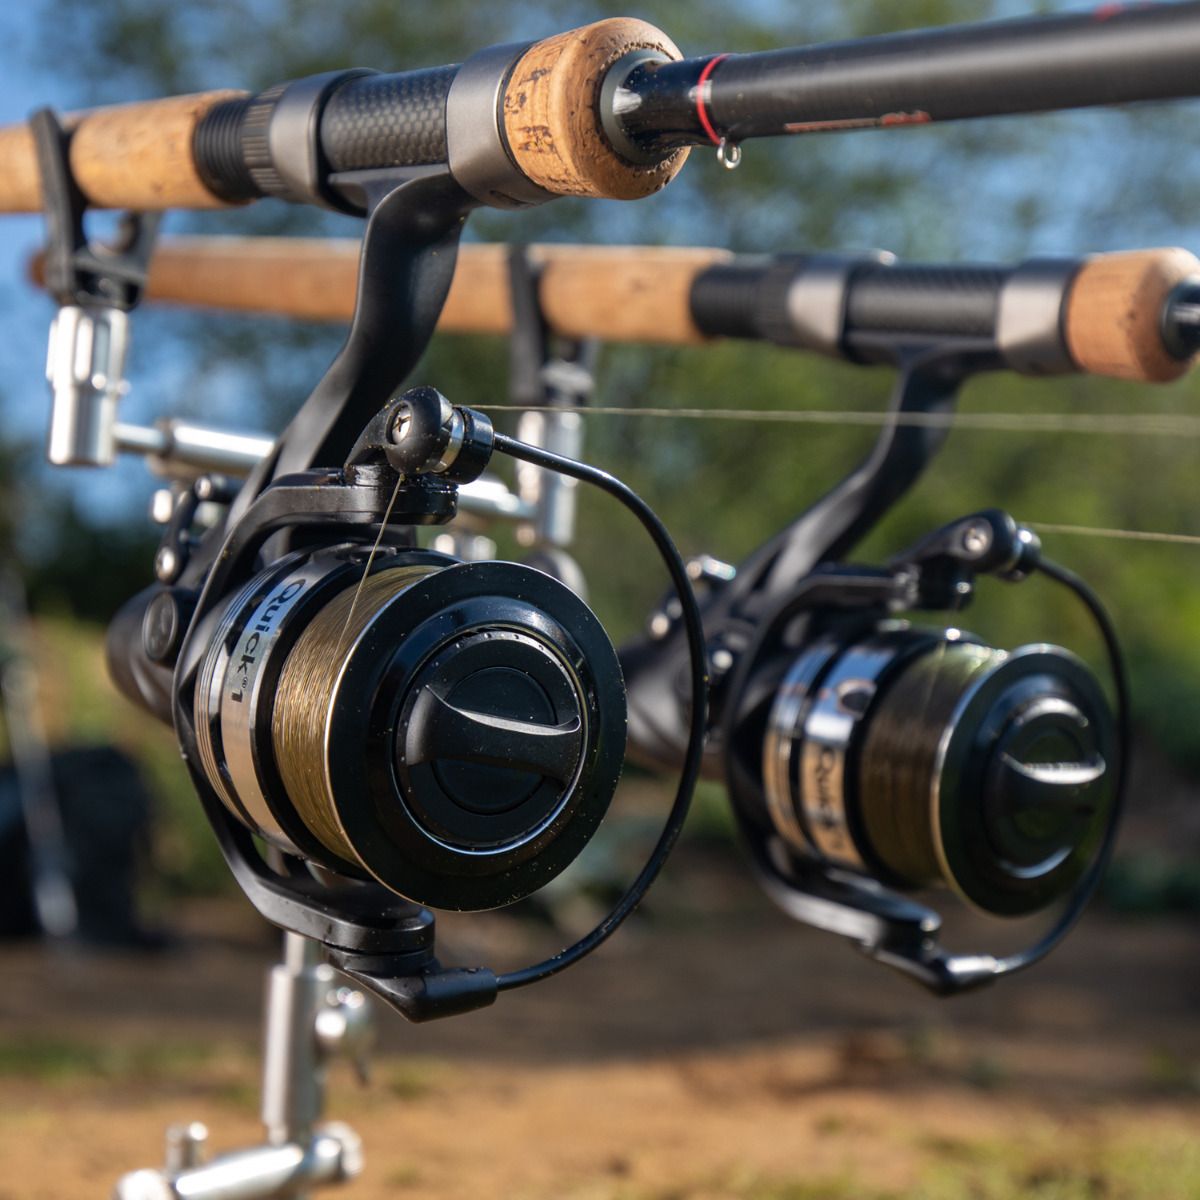 DAM Quick Reels Quick 1 RD - Spinning Reels - PROTACKLESHOP